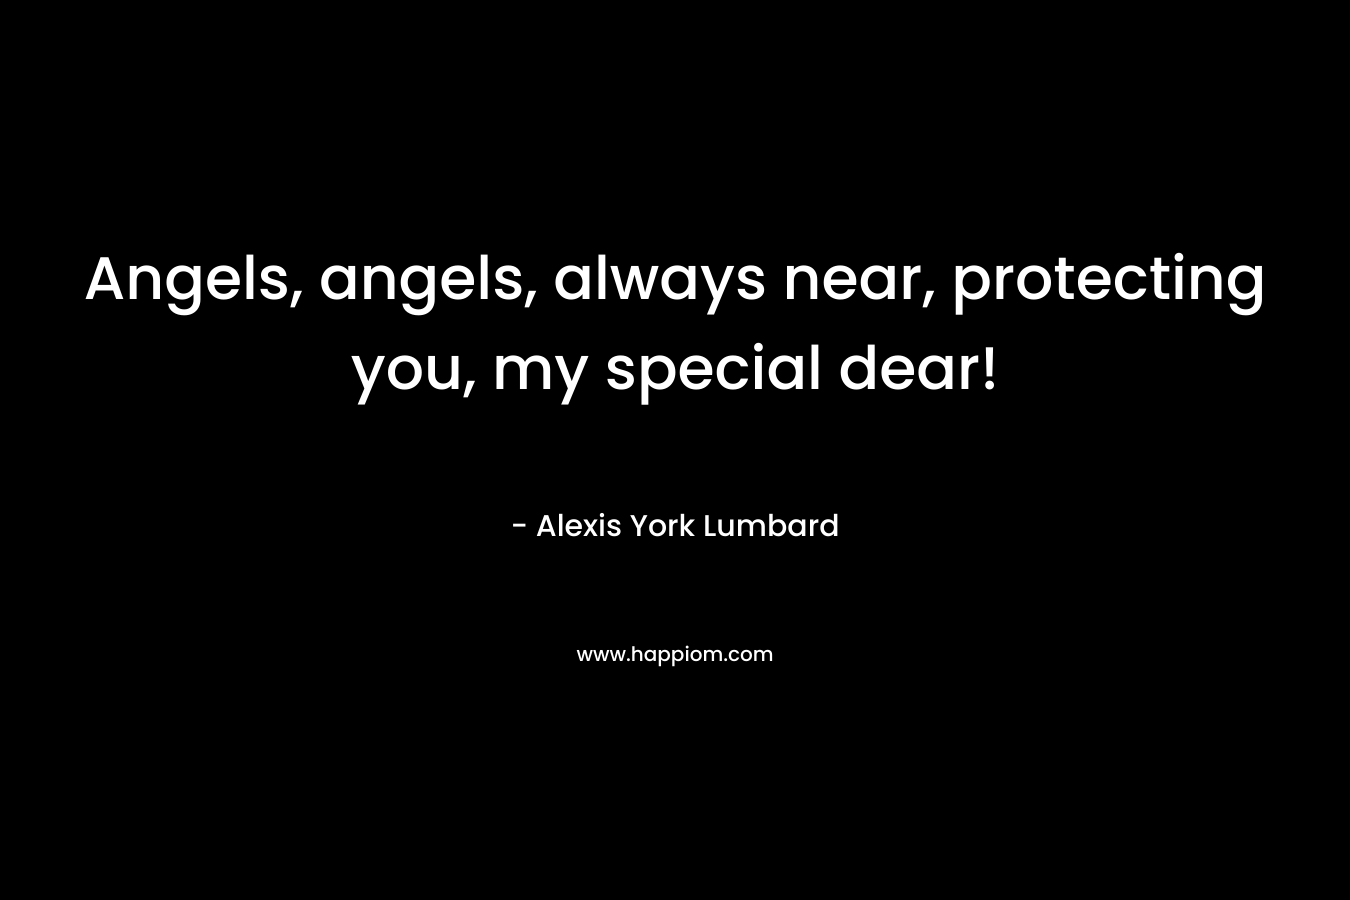 Angels, angels, always near, protecting you, my special dear! – Alexis York Lumbard